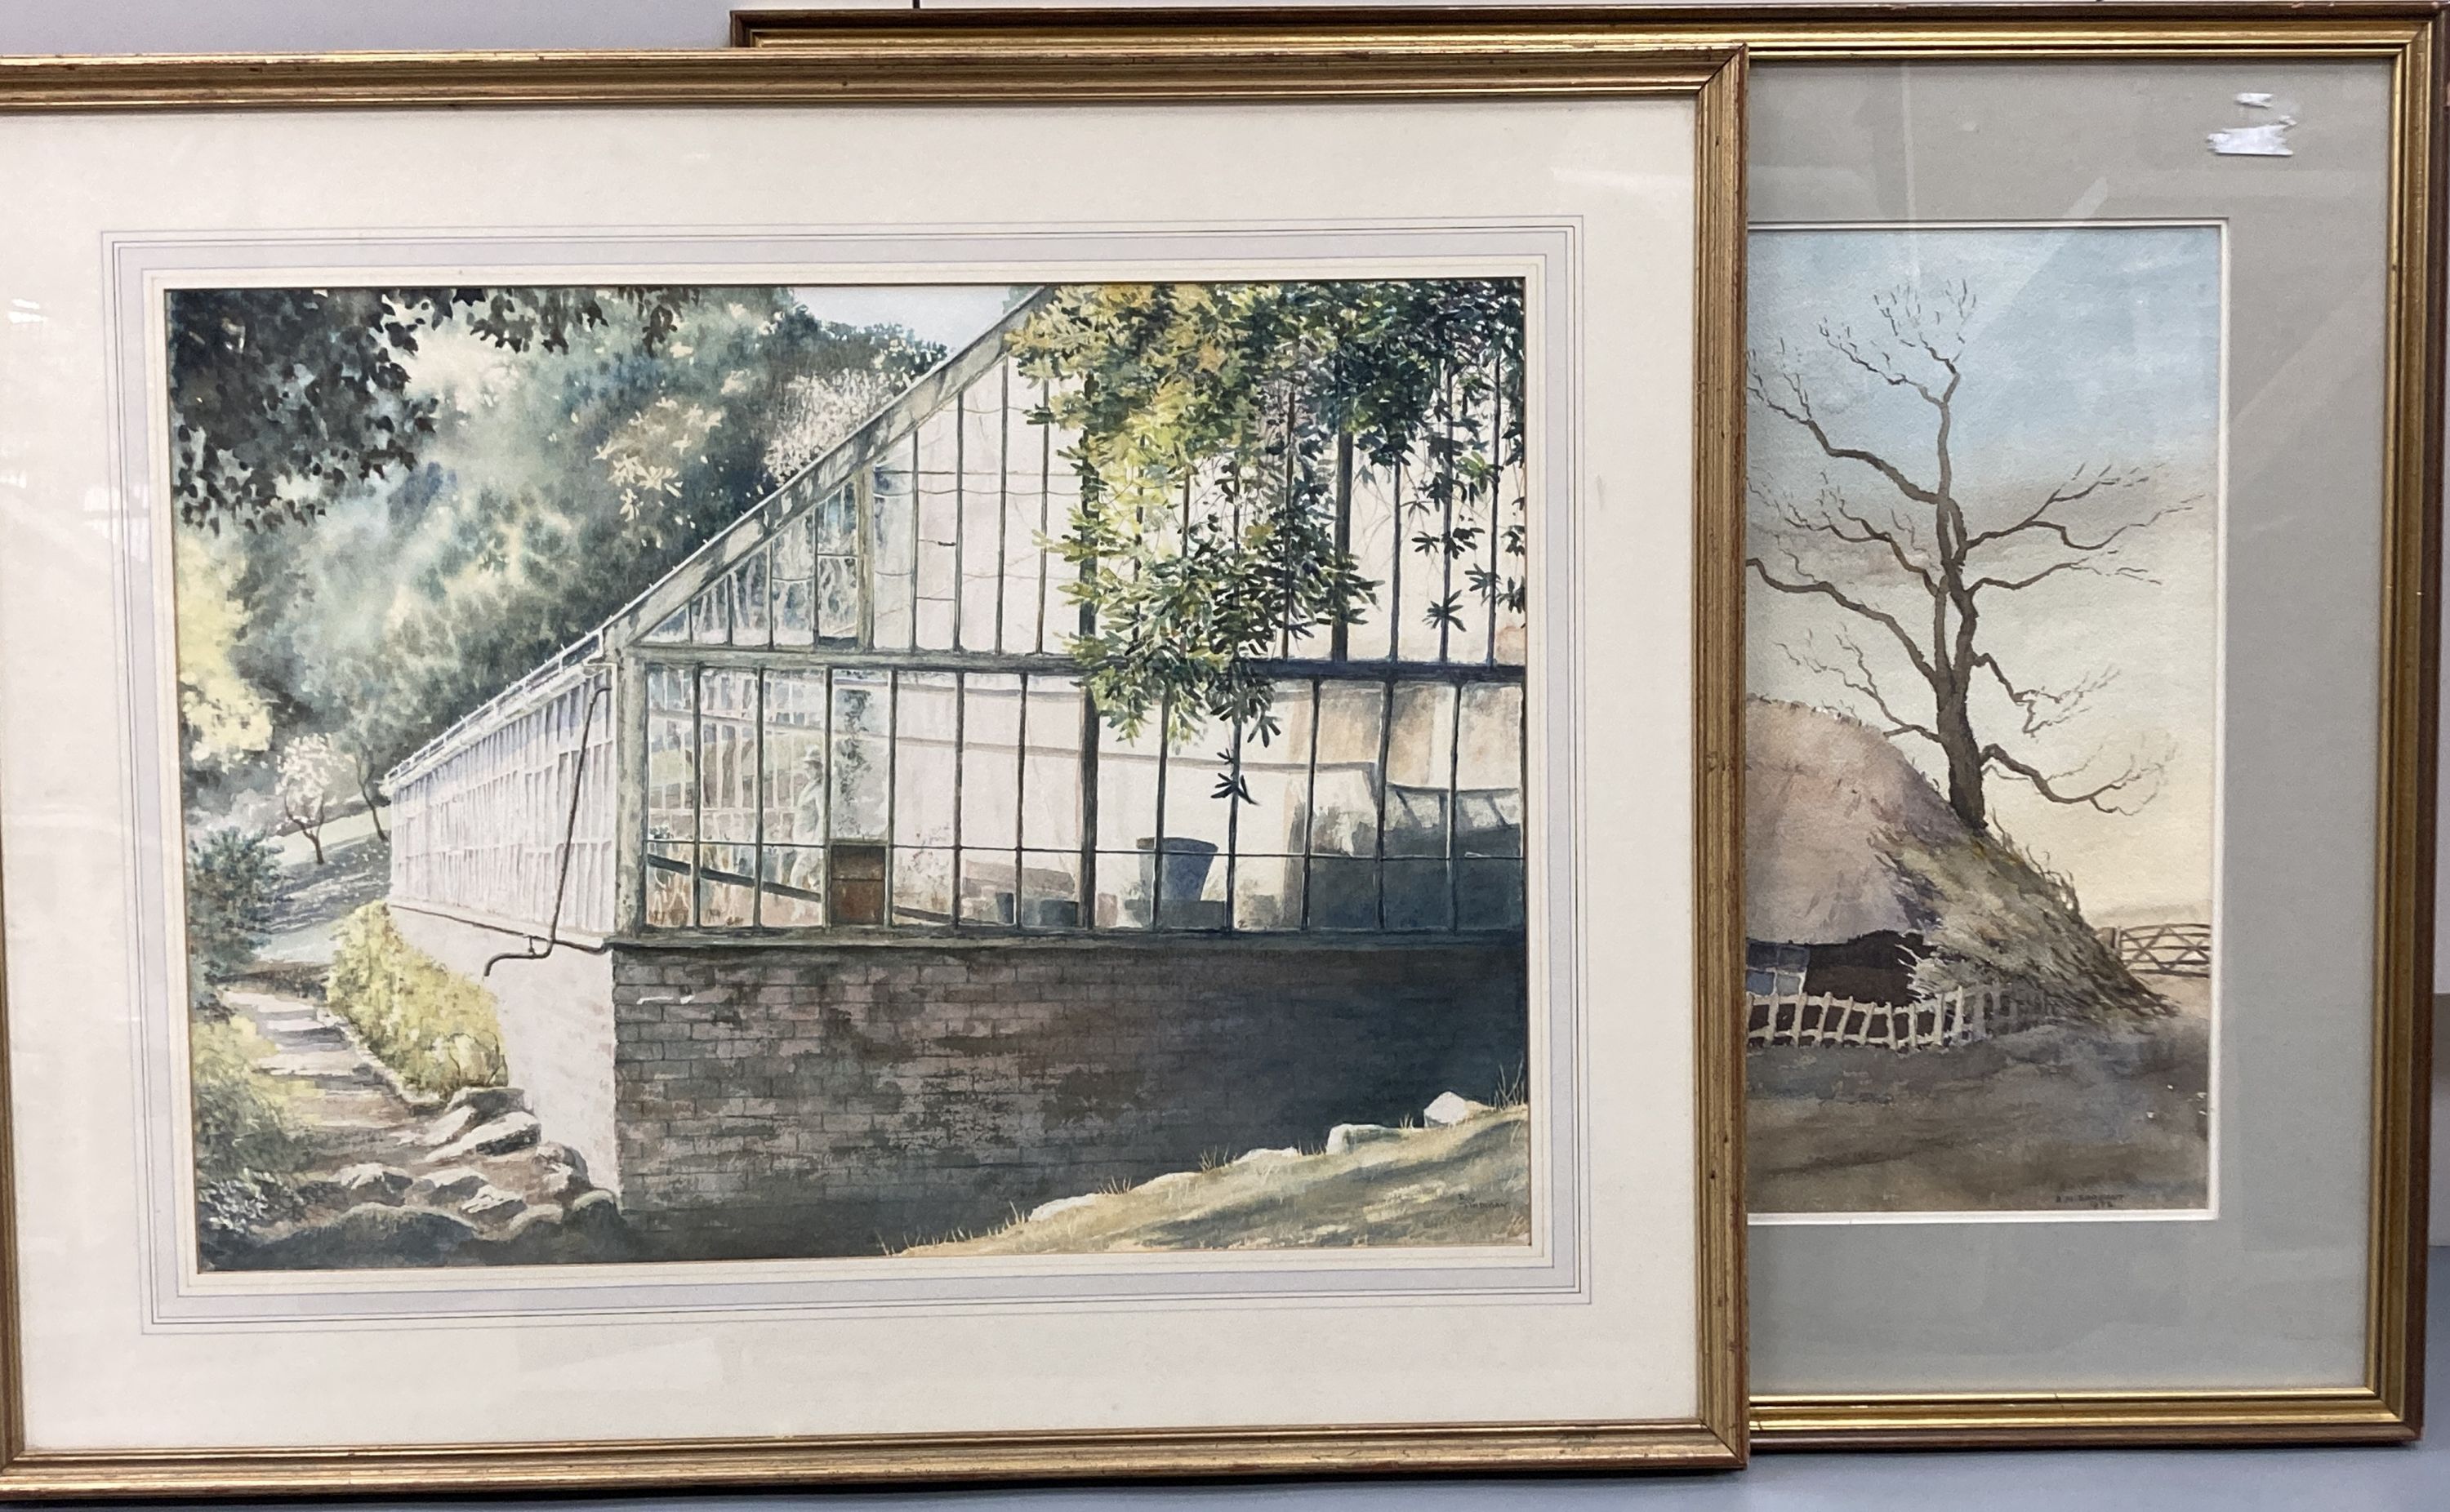 A.N. Sargant, watercolour, Thatched cottage, signed and dated 1972, 42 x 53cm and a watercolour of a greenhouse by Roy Stedman, 41 x 55